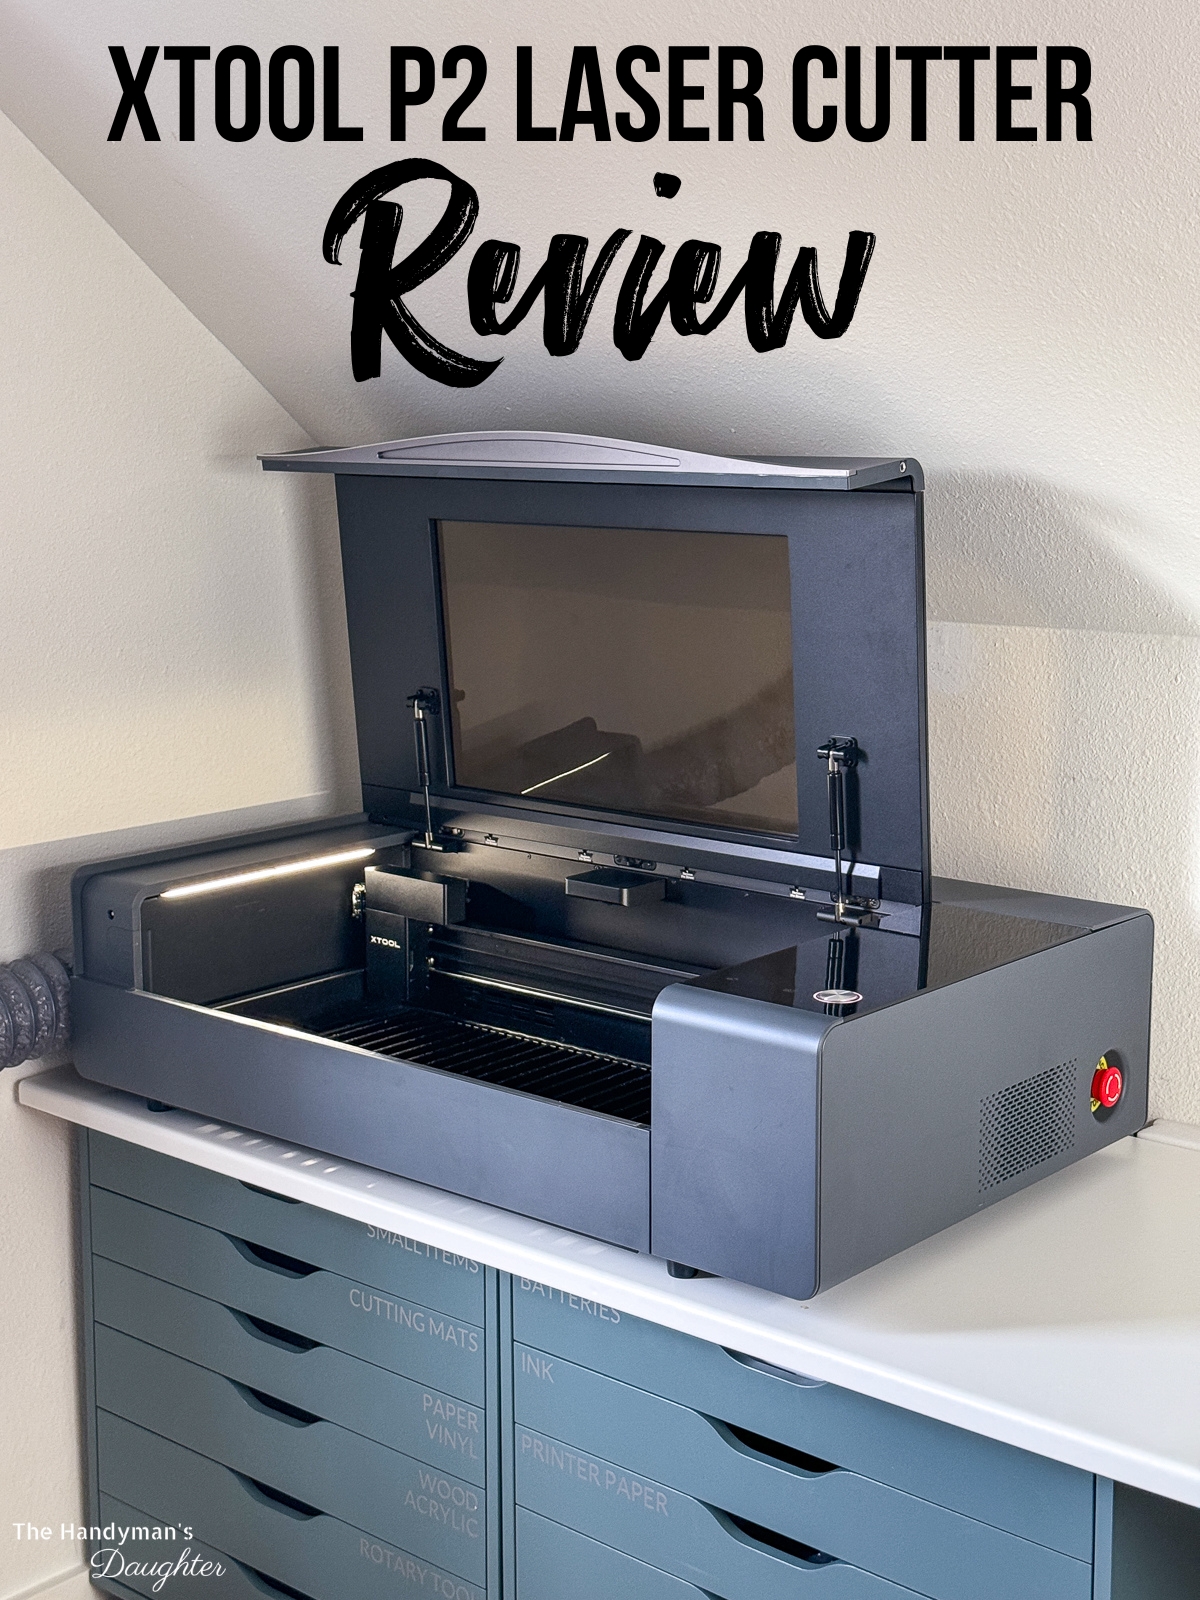 xTool P2 laser cutter review